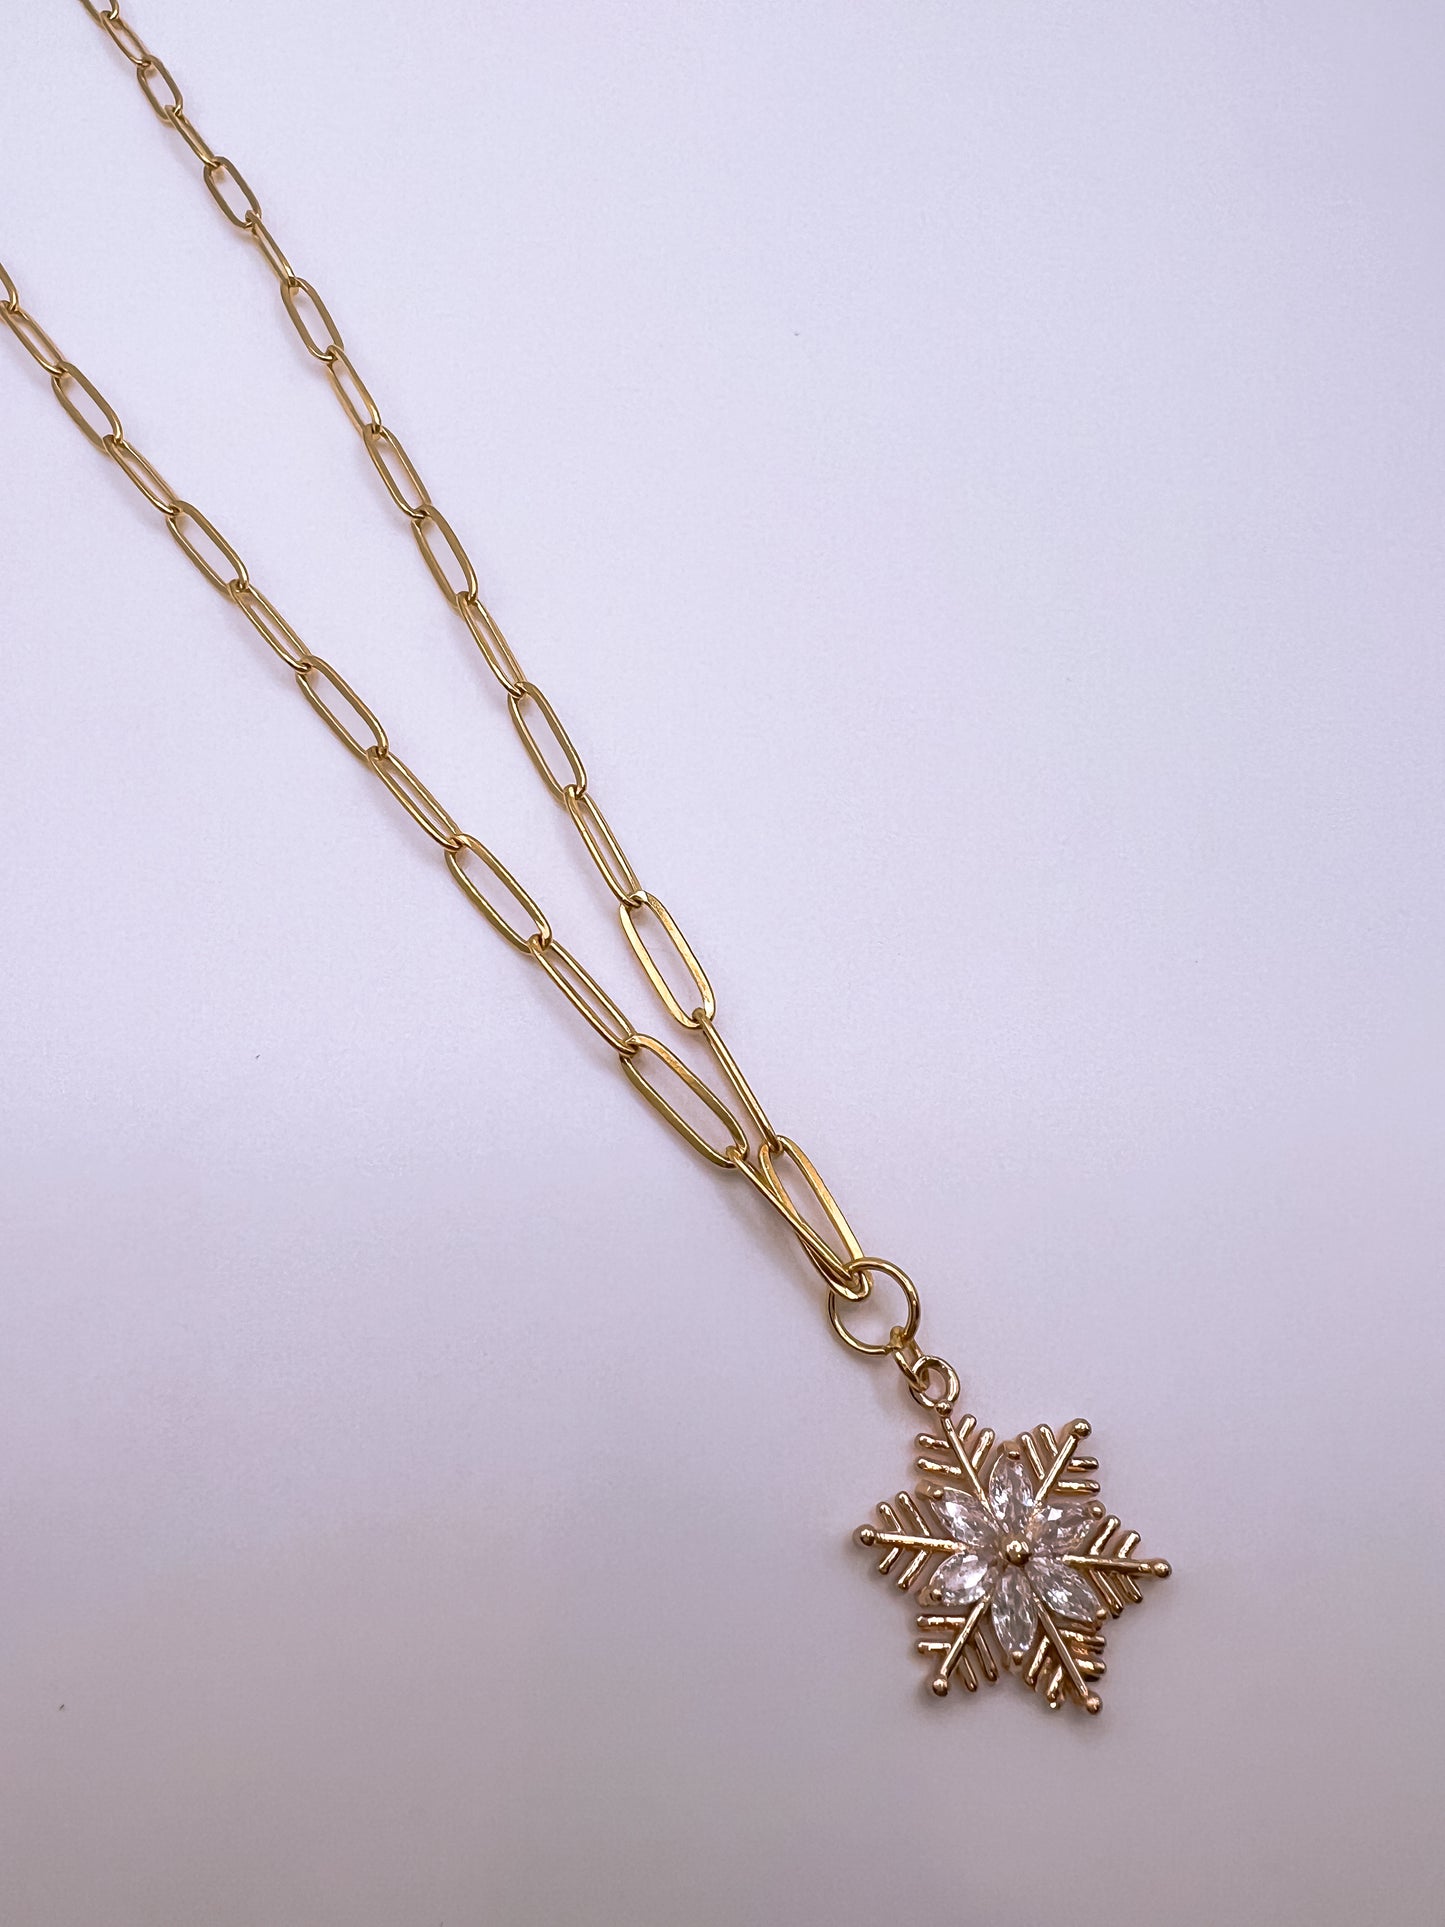 Ice Queen Necklace